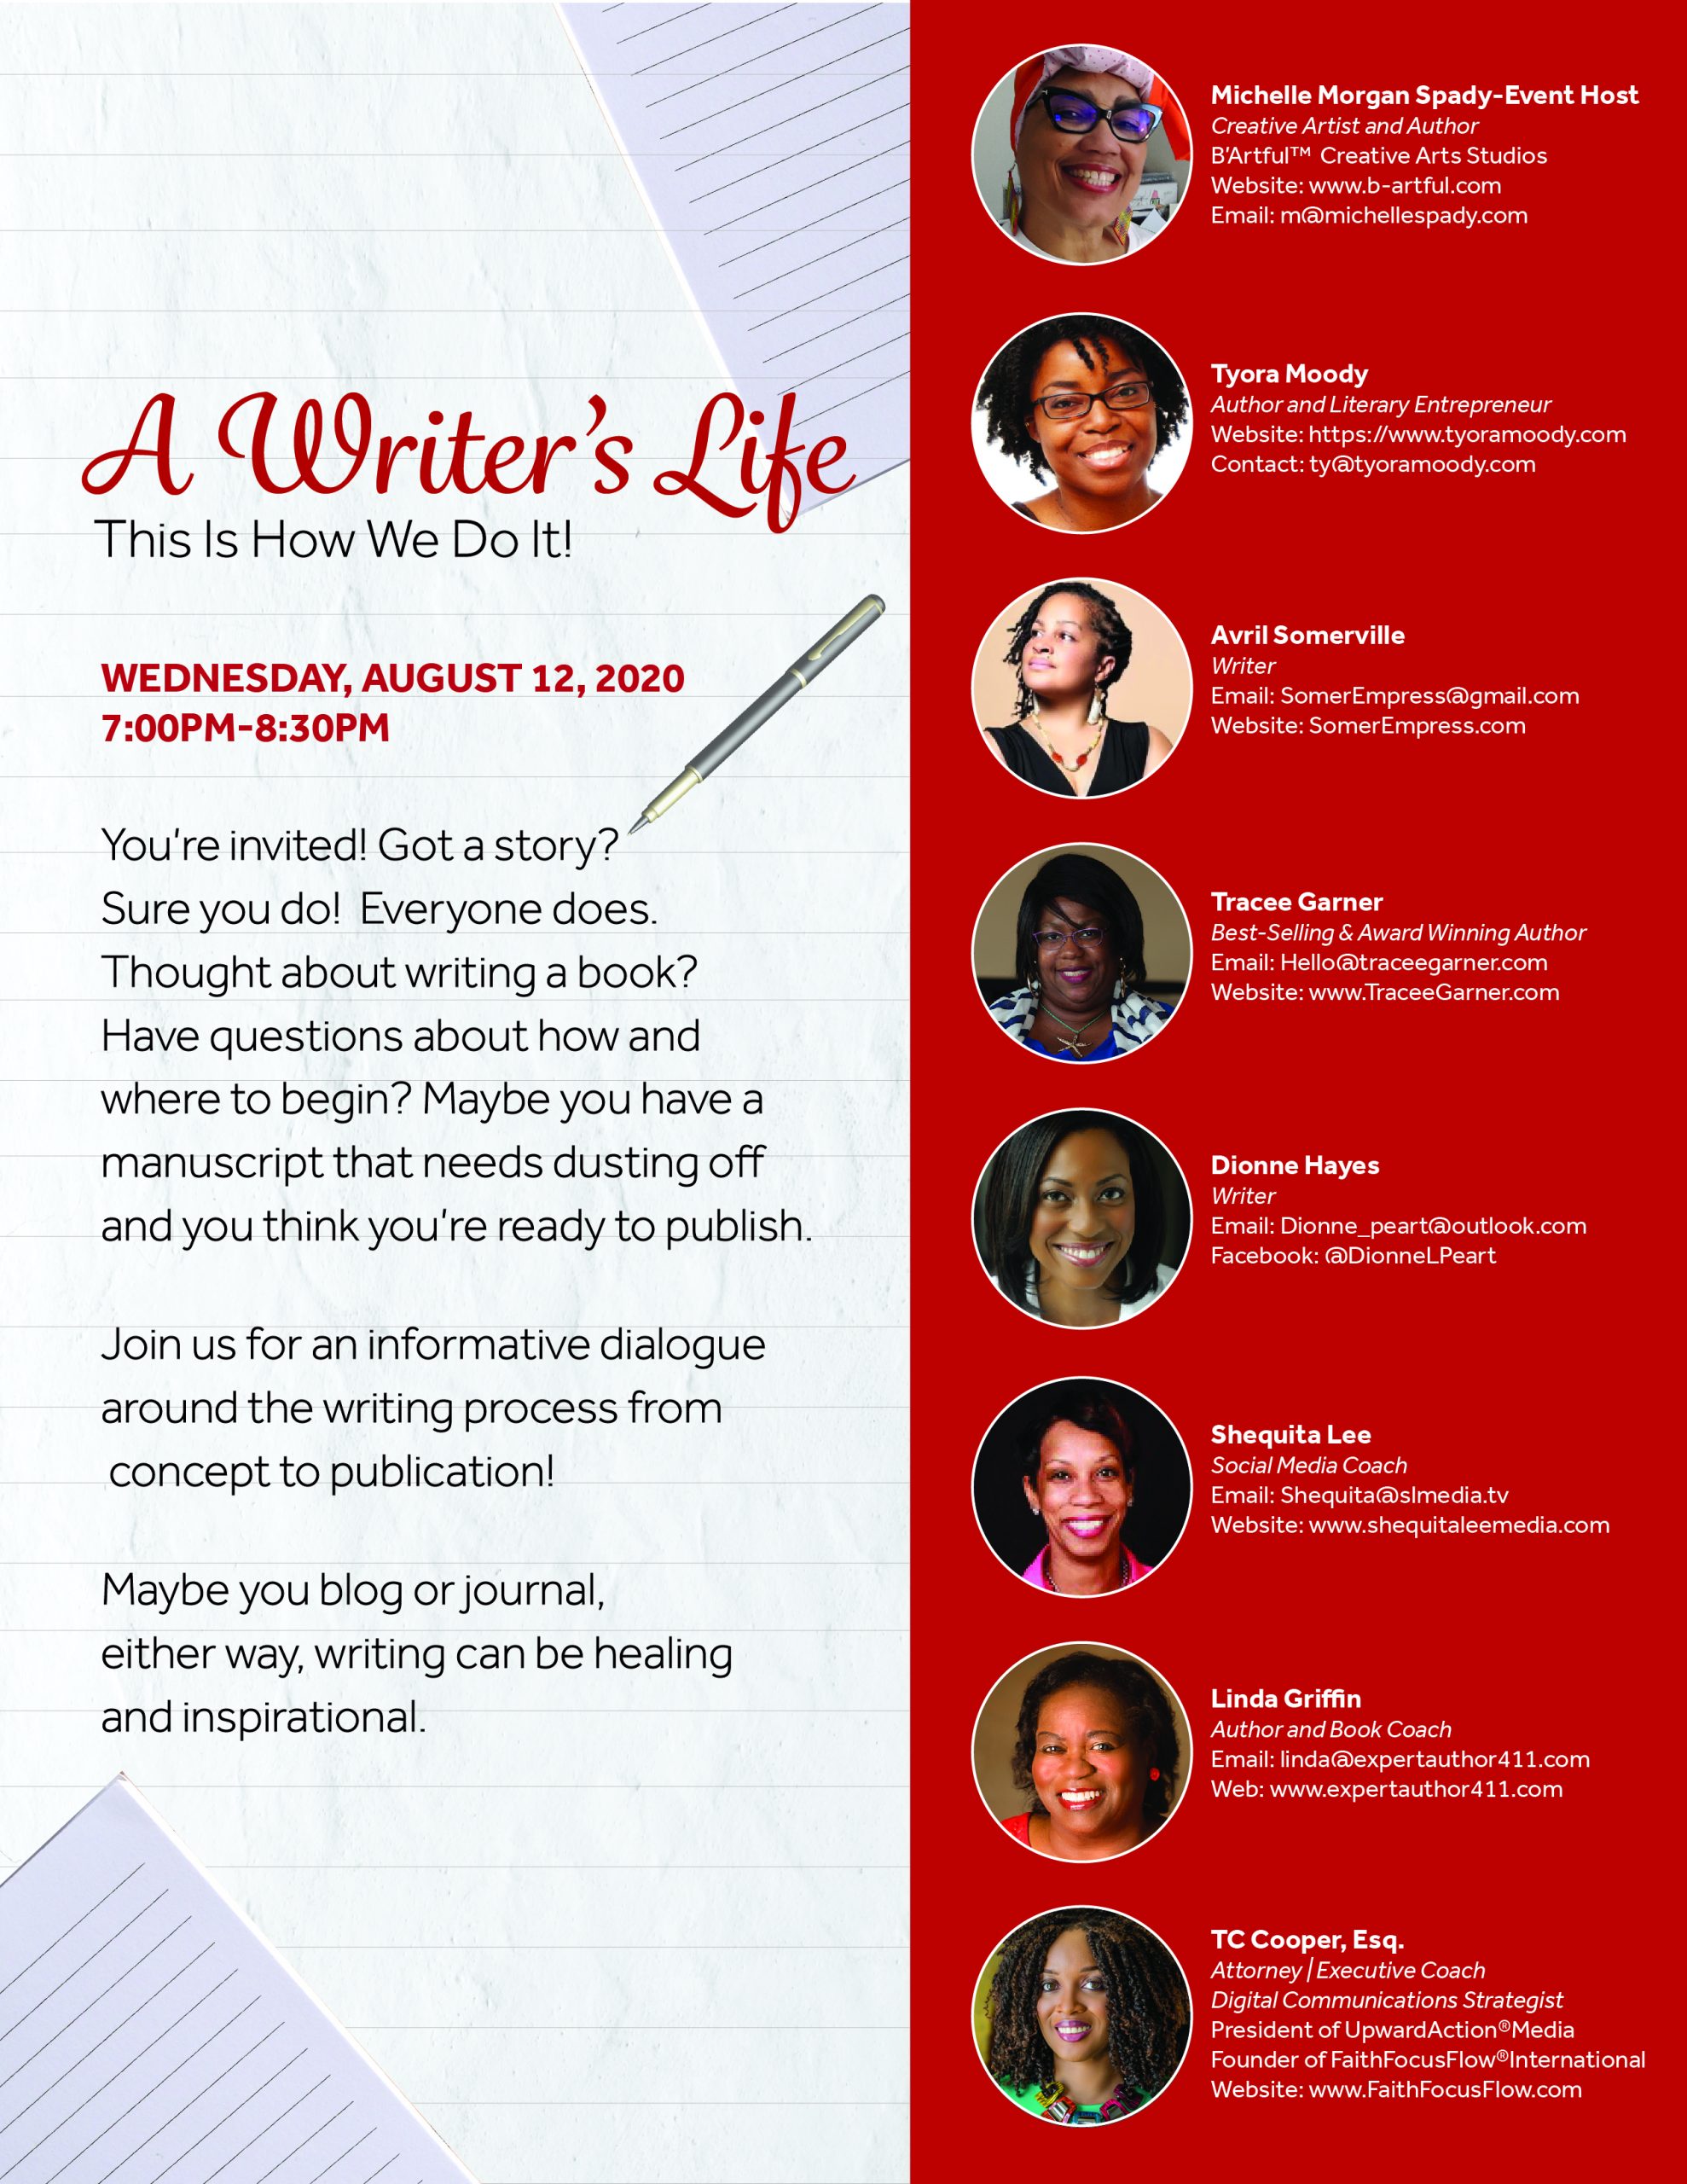 Stepping Into Victory Author hosts “A Writer’s Life: This Is How We Do It!” Webinar